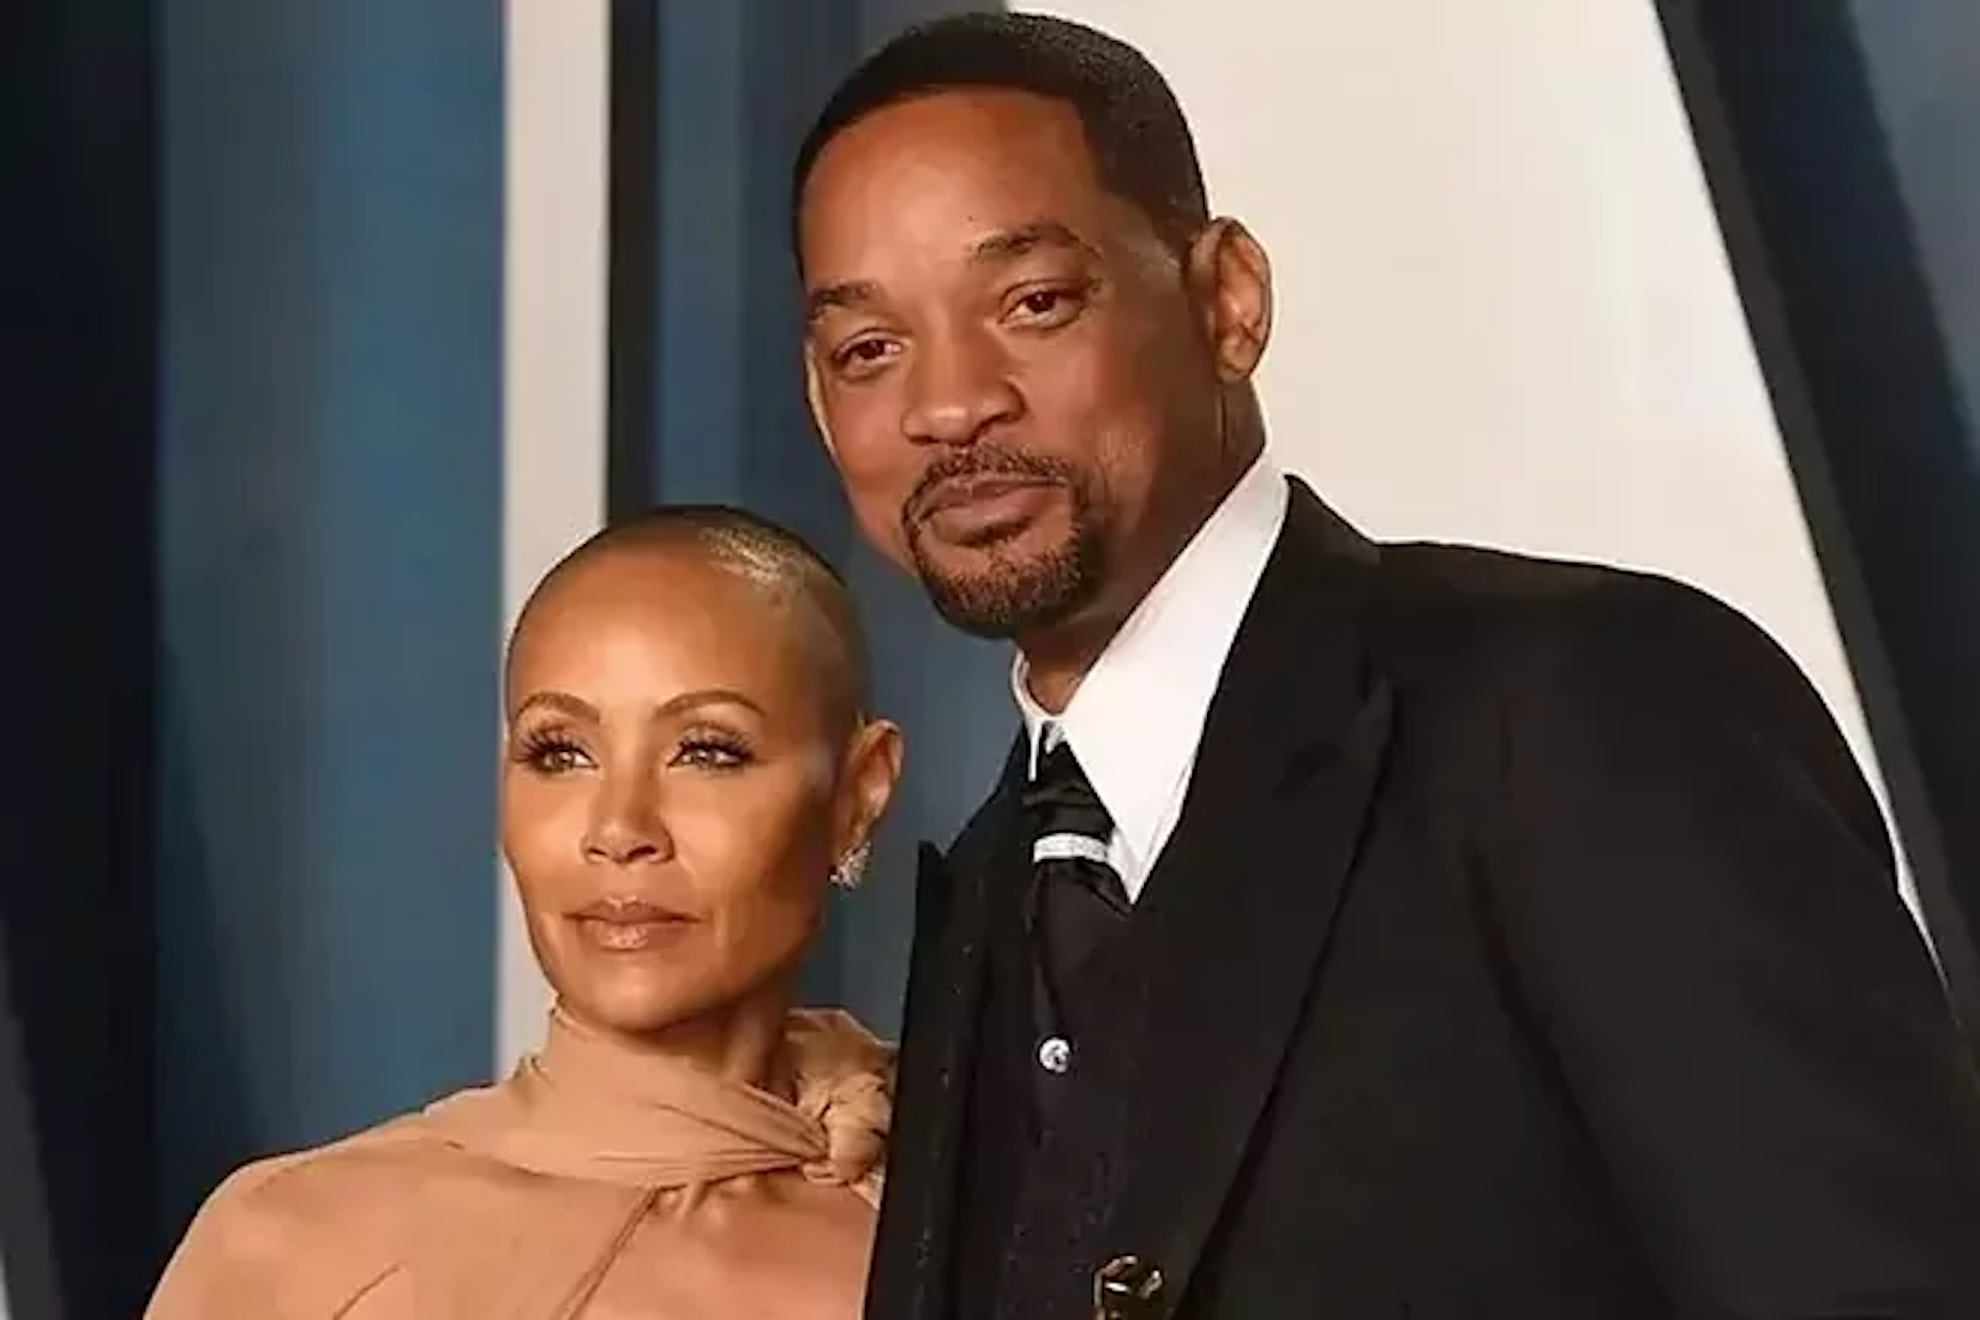 Jada Pinkett Smith shares pictures spending Thanksgiving with Will Smith despite recent drama